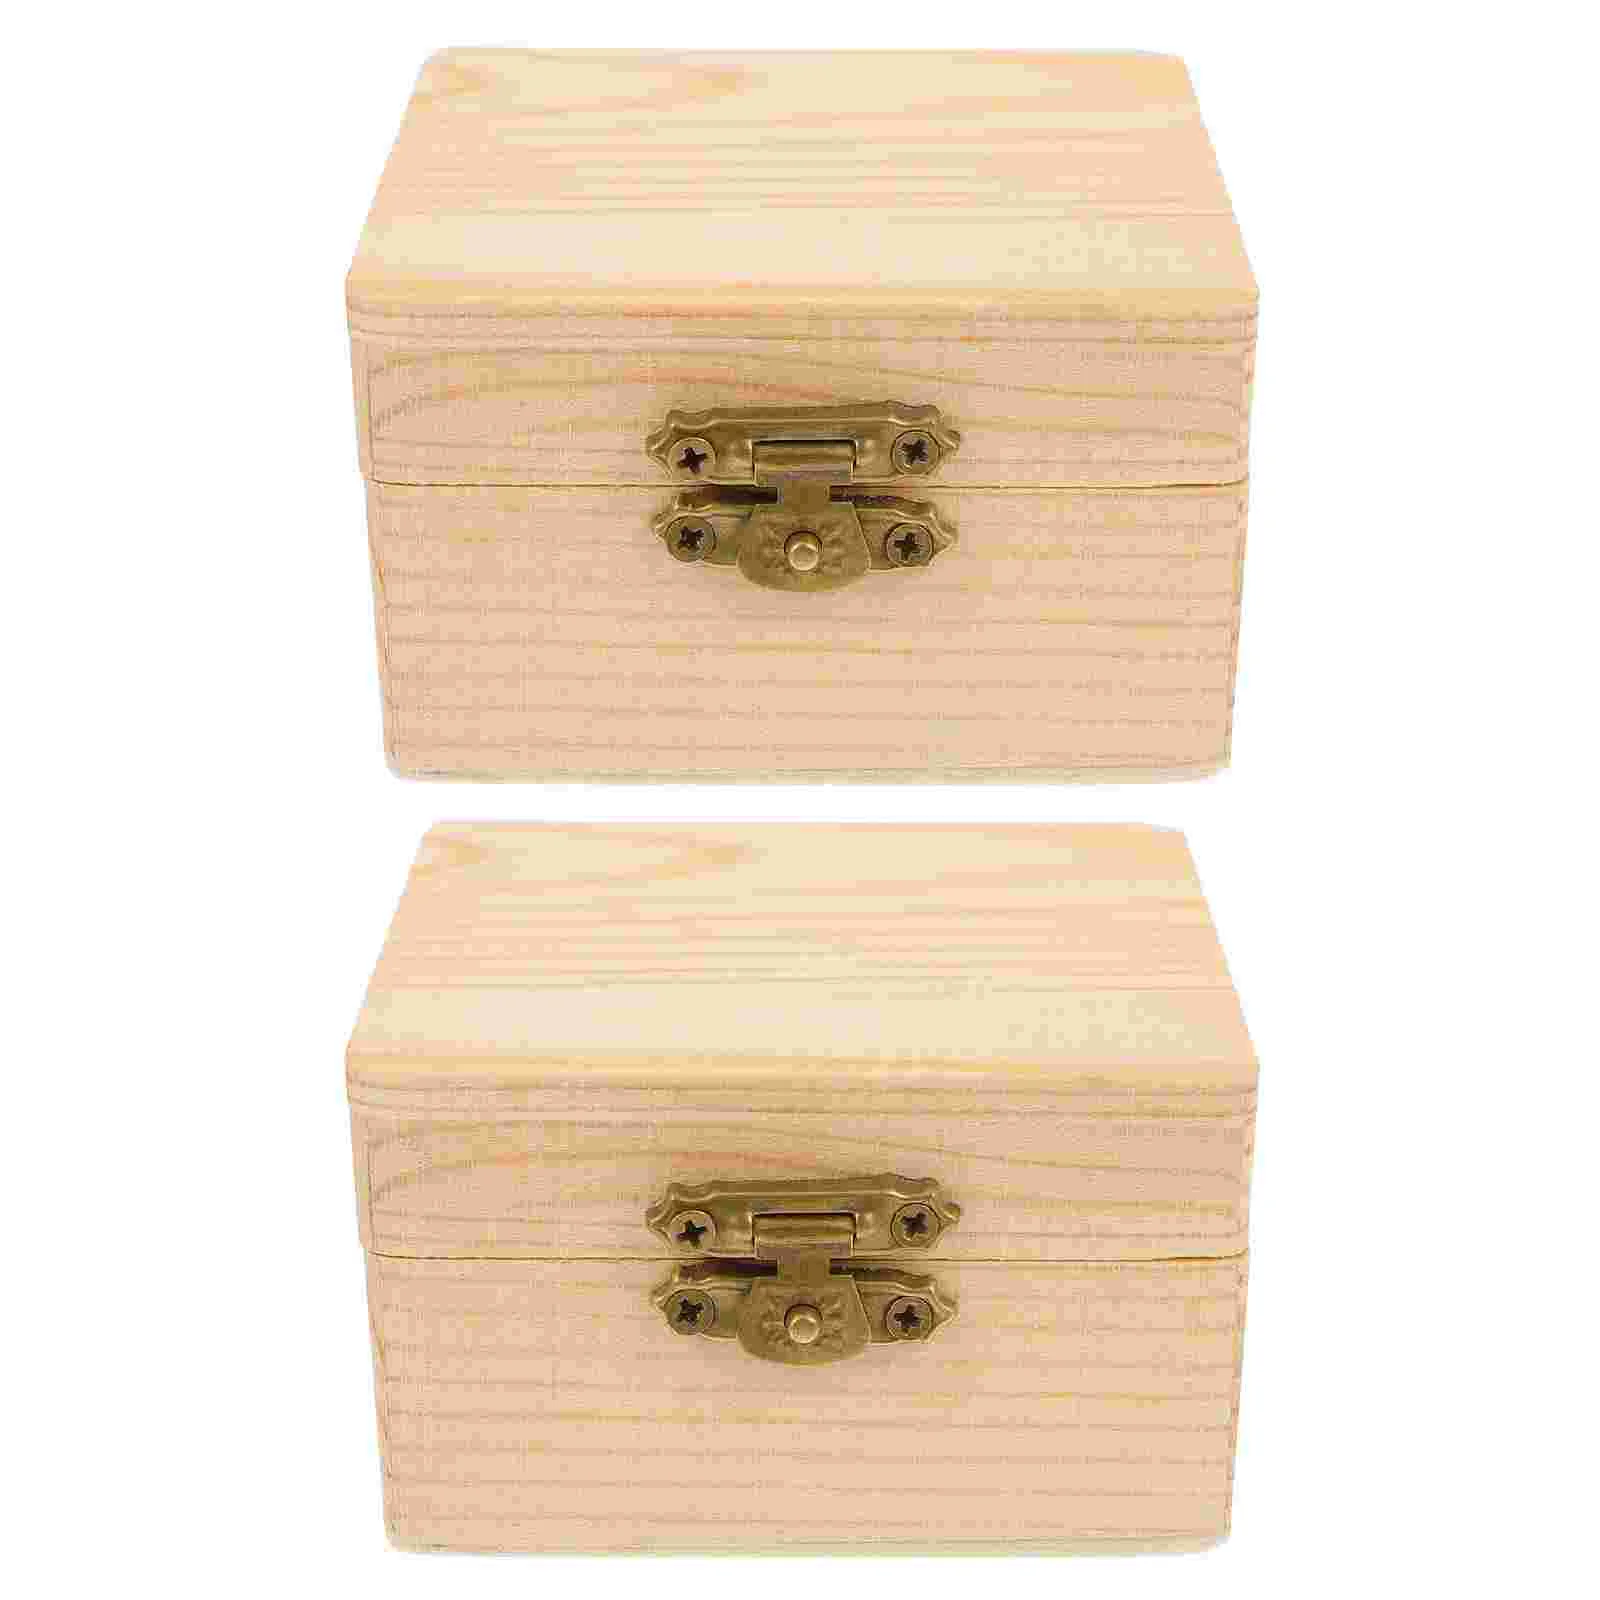 

Box Wood Wooden Boxes Unfinished Crafts Storage Case Craft Gift Candy Jewelry Keepsake Trinket Mini Square Clasp Car Interior